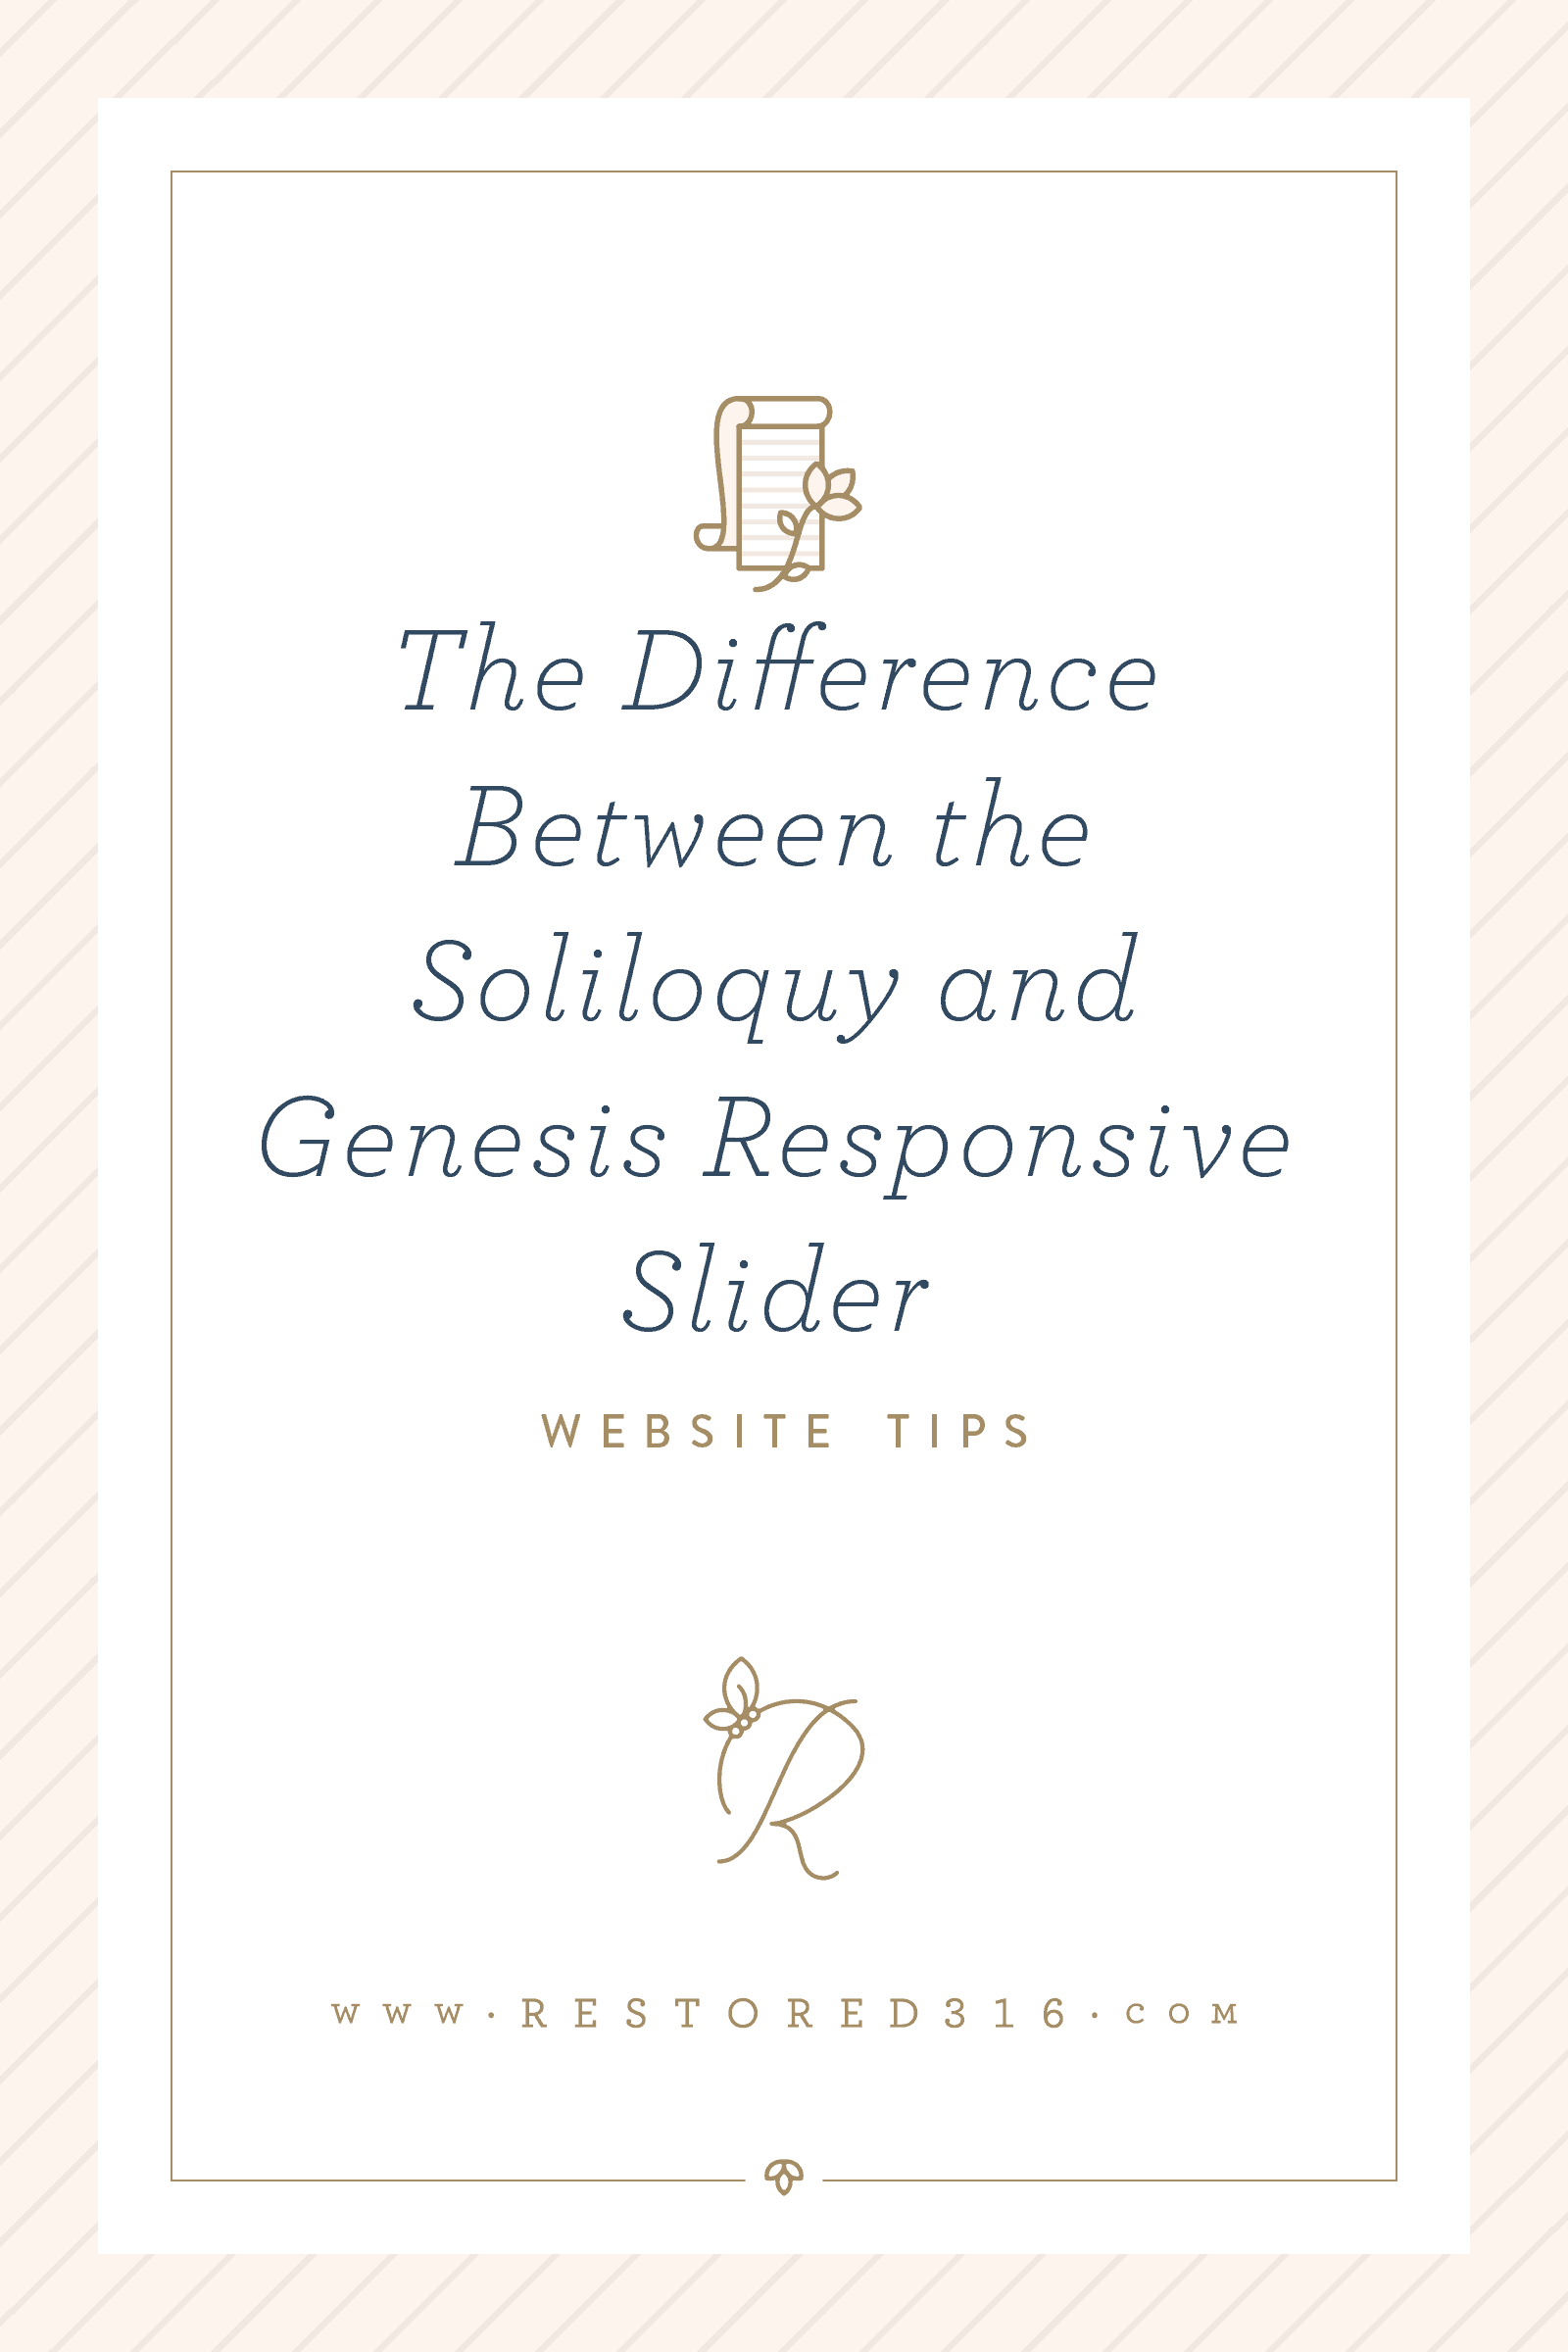 The difference between the Soliloquy and Genesis Responsive Slider